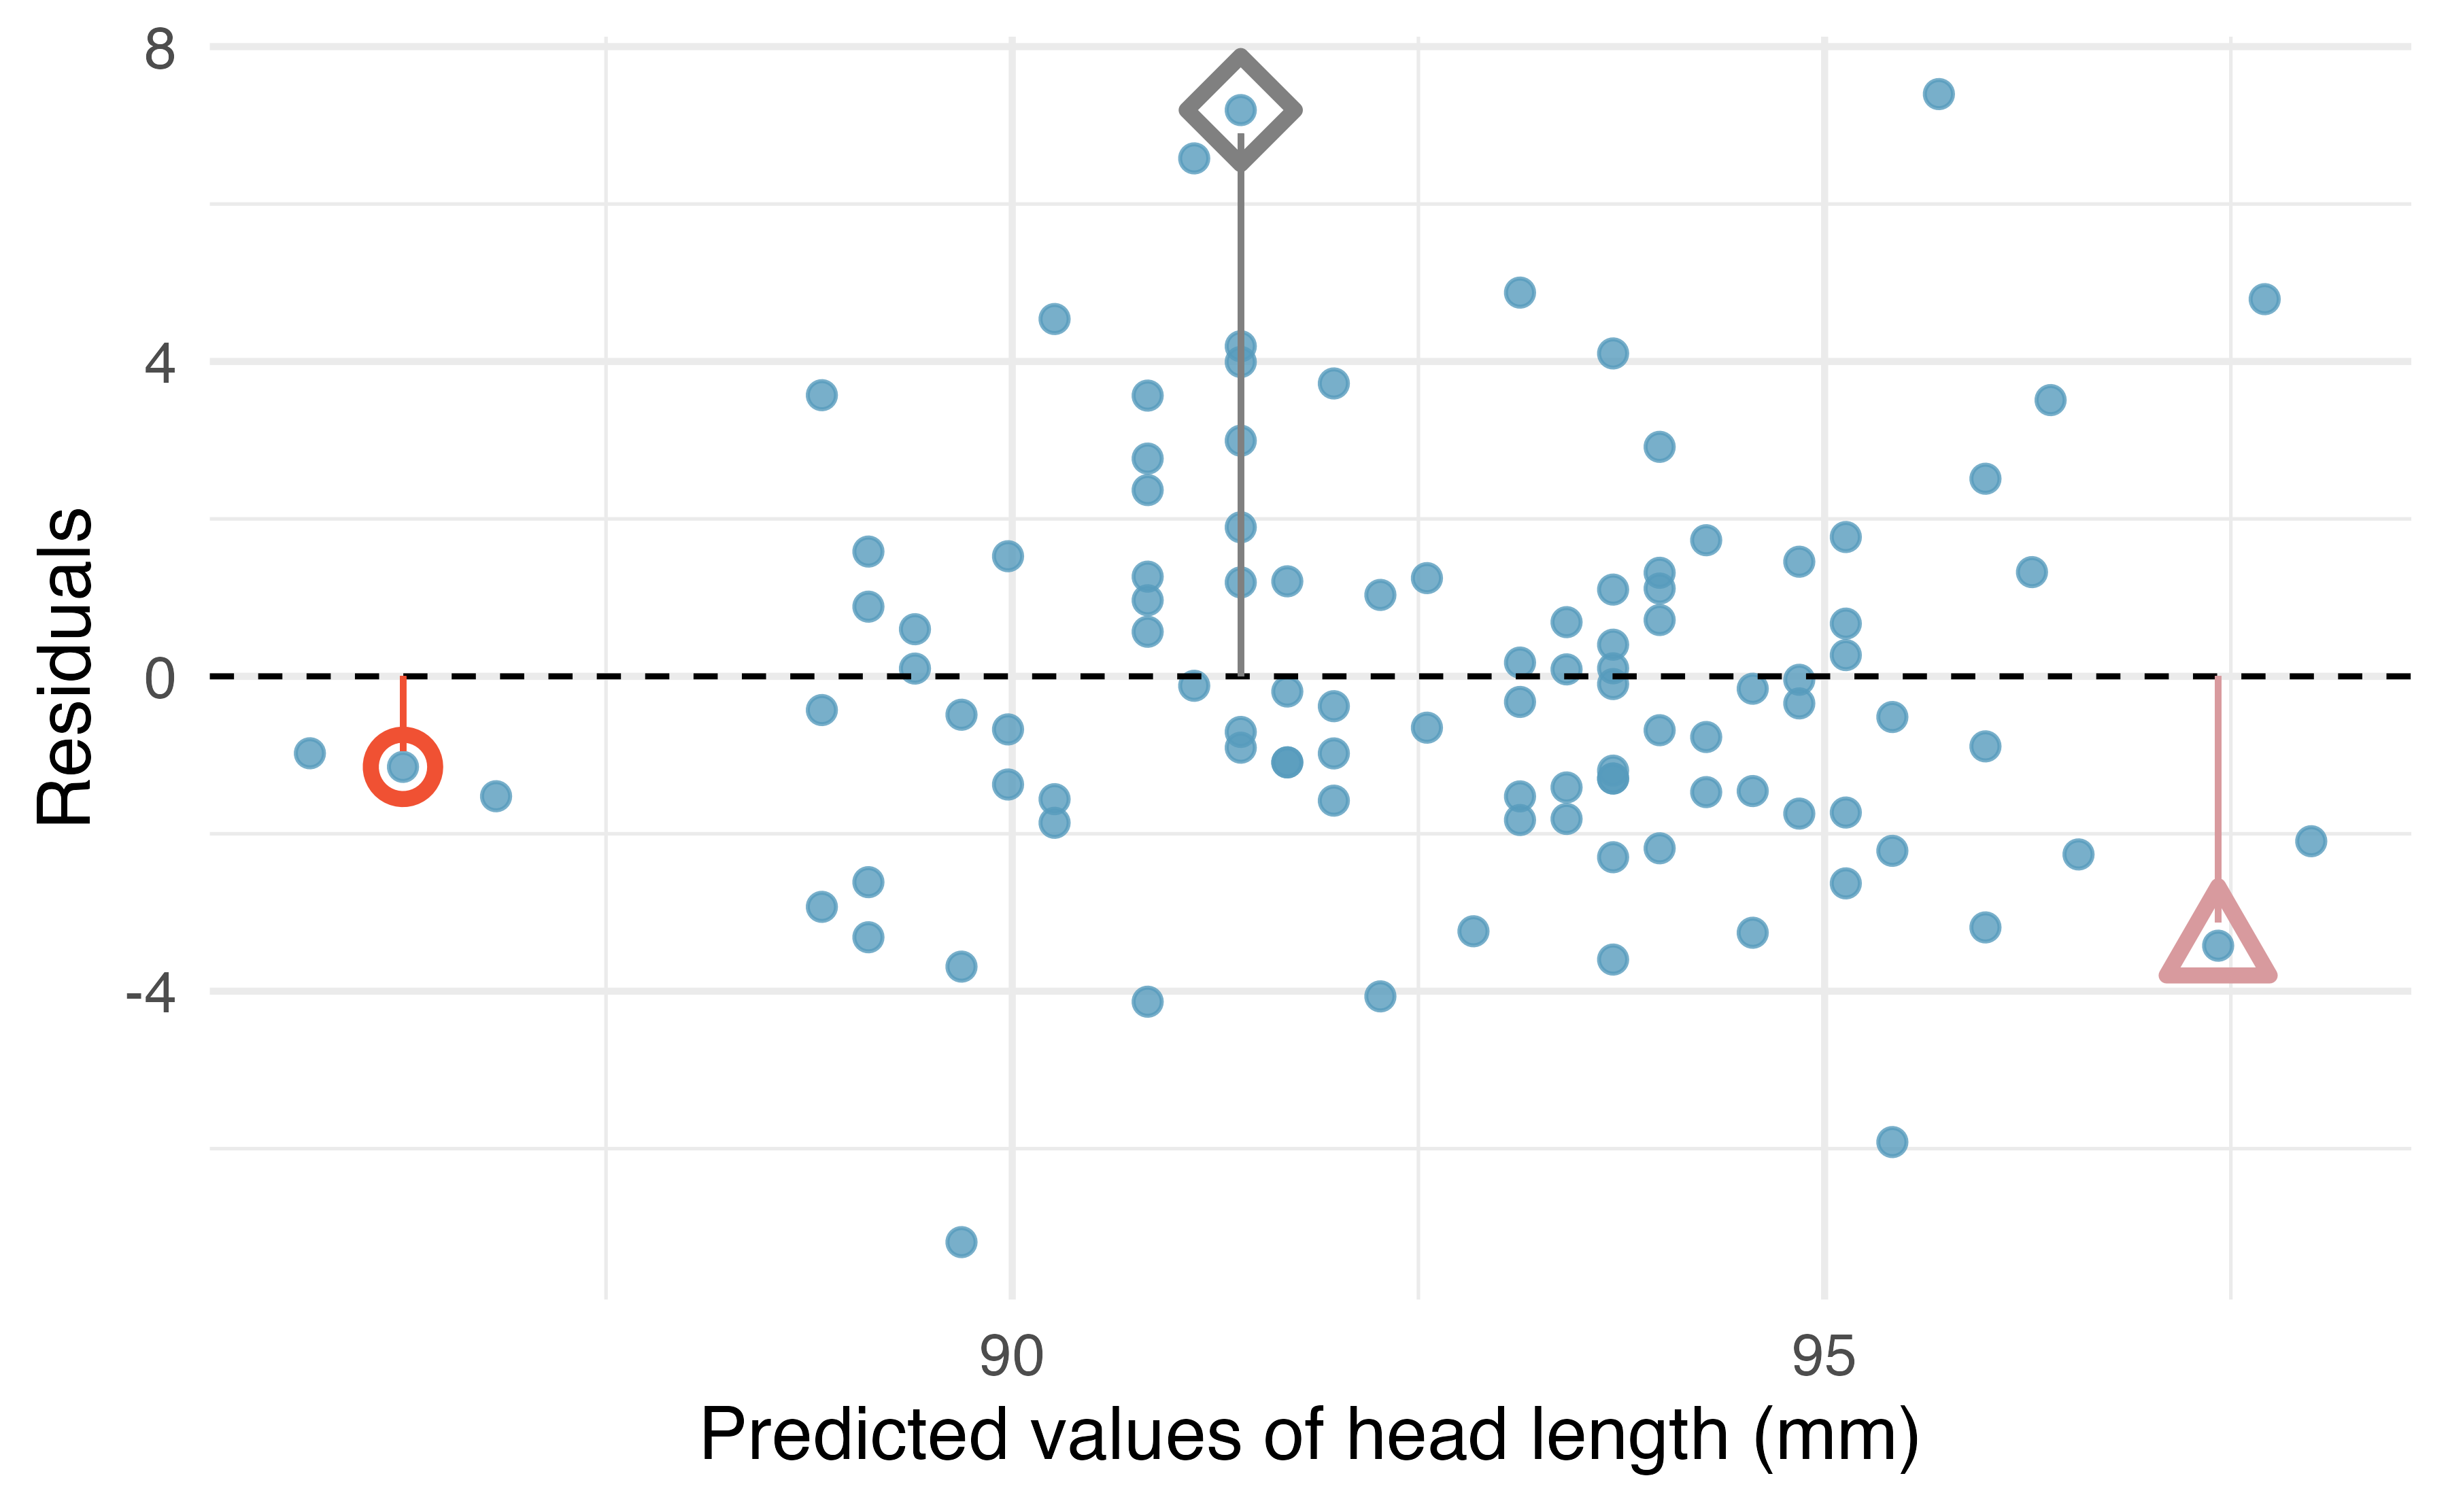 Residual plot for the model predicting head length from total length for brushtail possums.